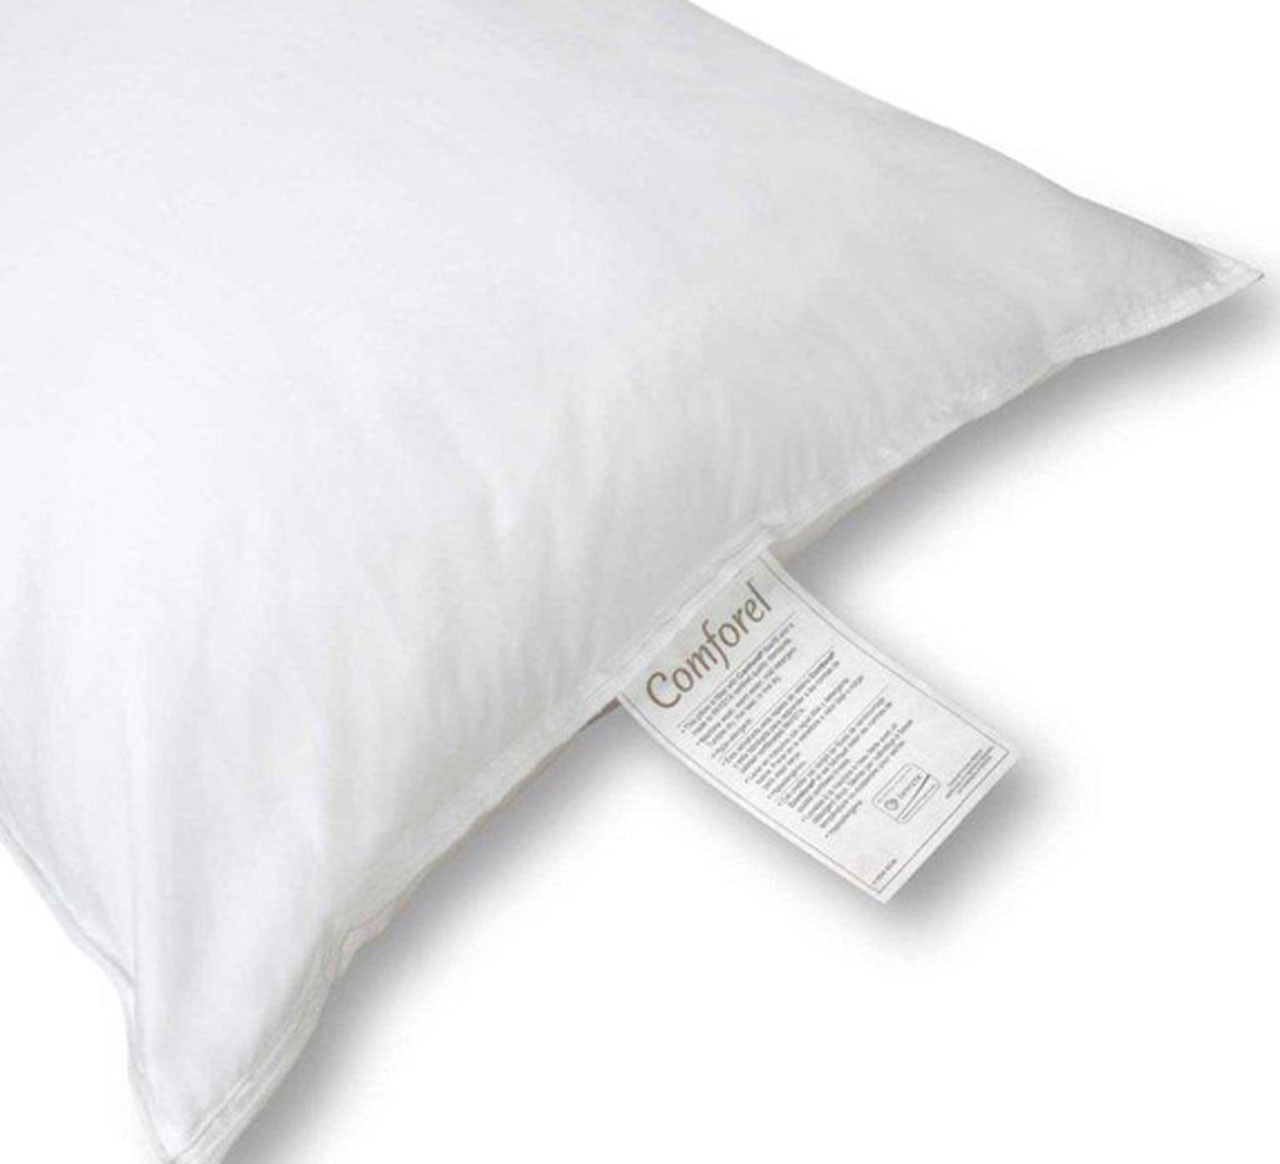 What are the features of Comforel® pillows?